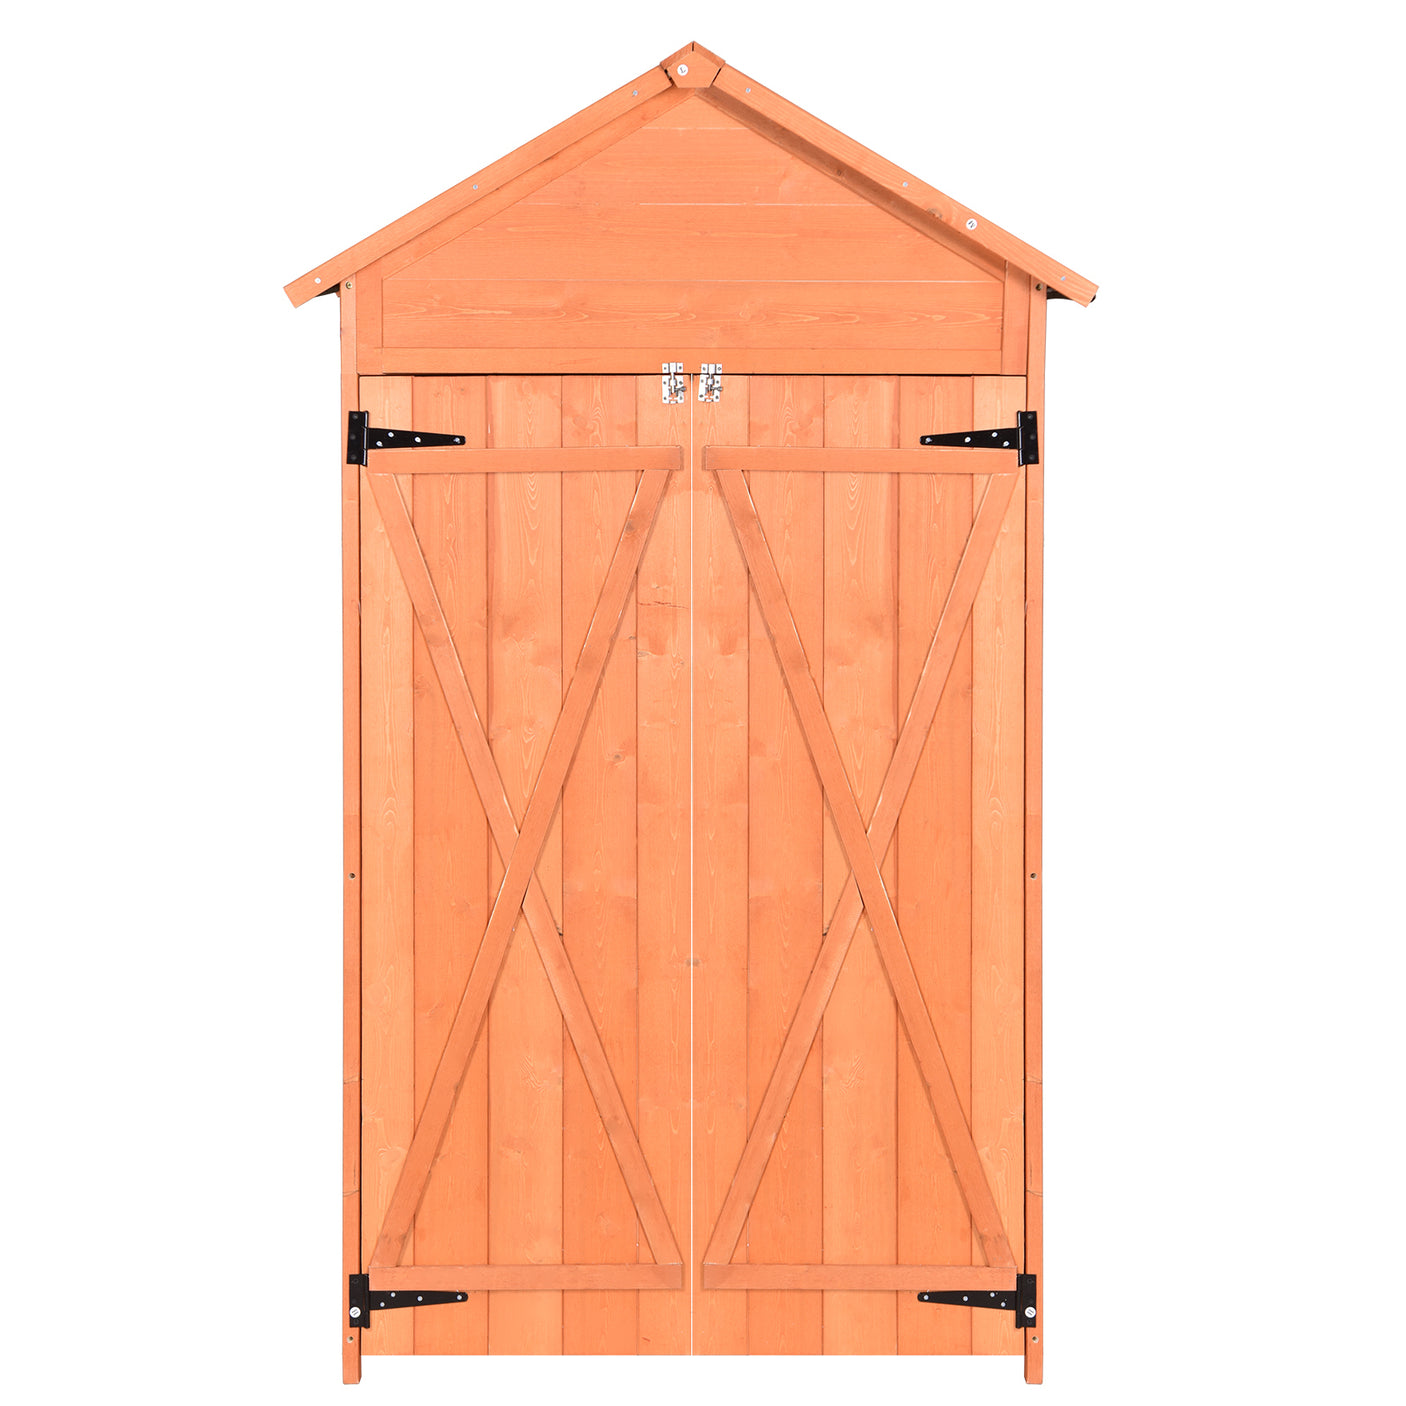 Outdoor Storage Shed Wood Tool Shed Waterproof Garden Storage Cabinet with Lockable Doors for Patio Furniture, Backyard, Lawn, Meadow, Farmland